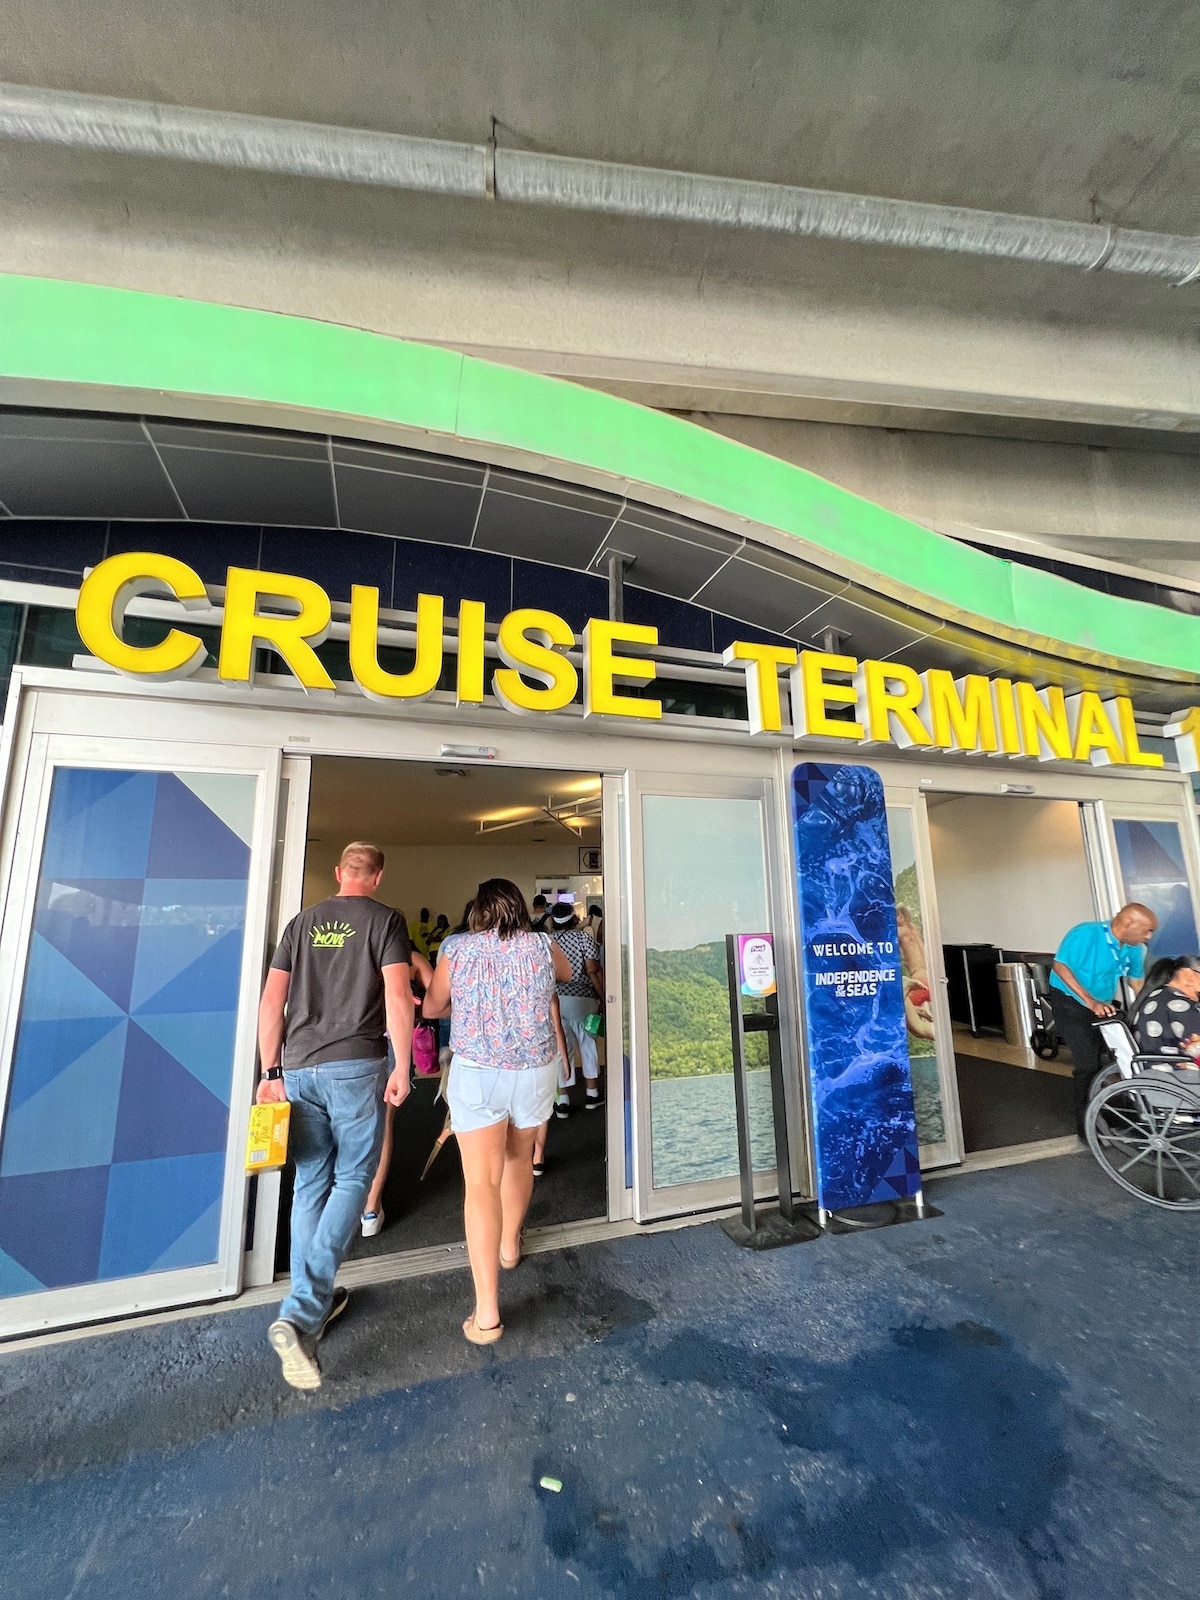 People walking into a building with a sign above that reads "CRUISE TERMINAL." A wheelchair-user is visible on the right side near the entrance.